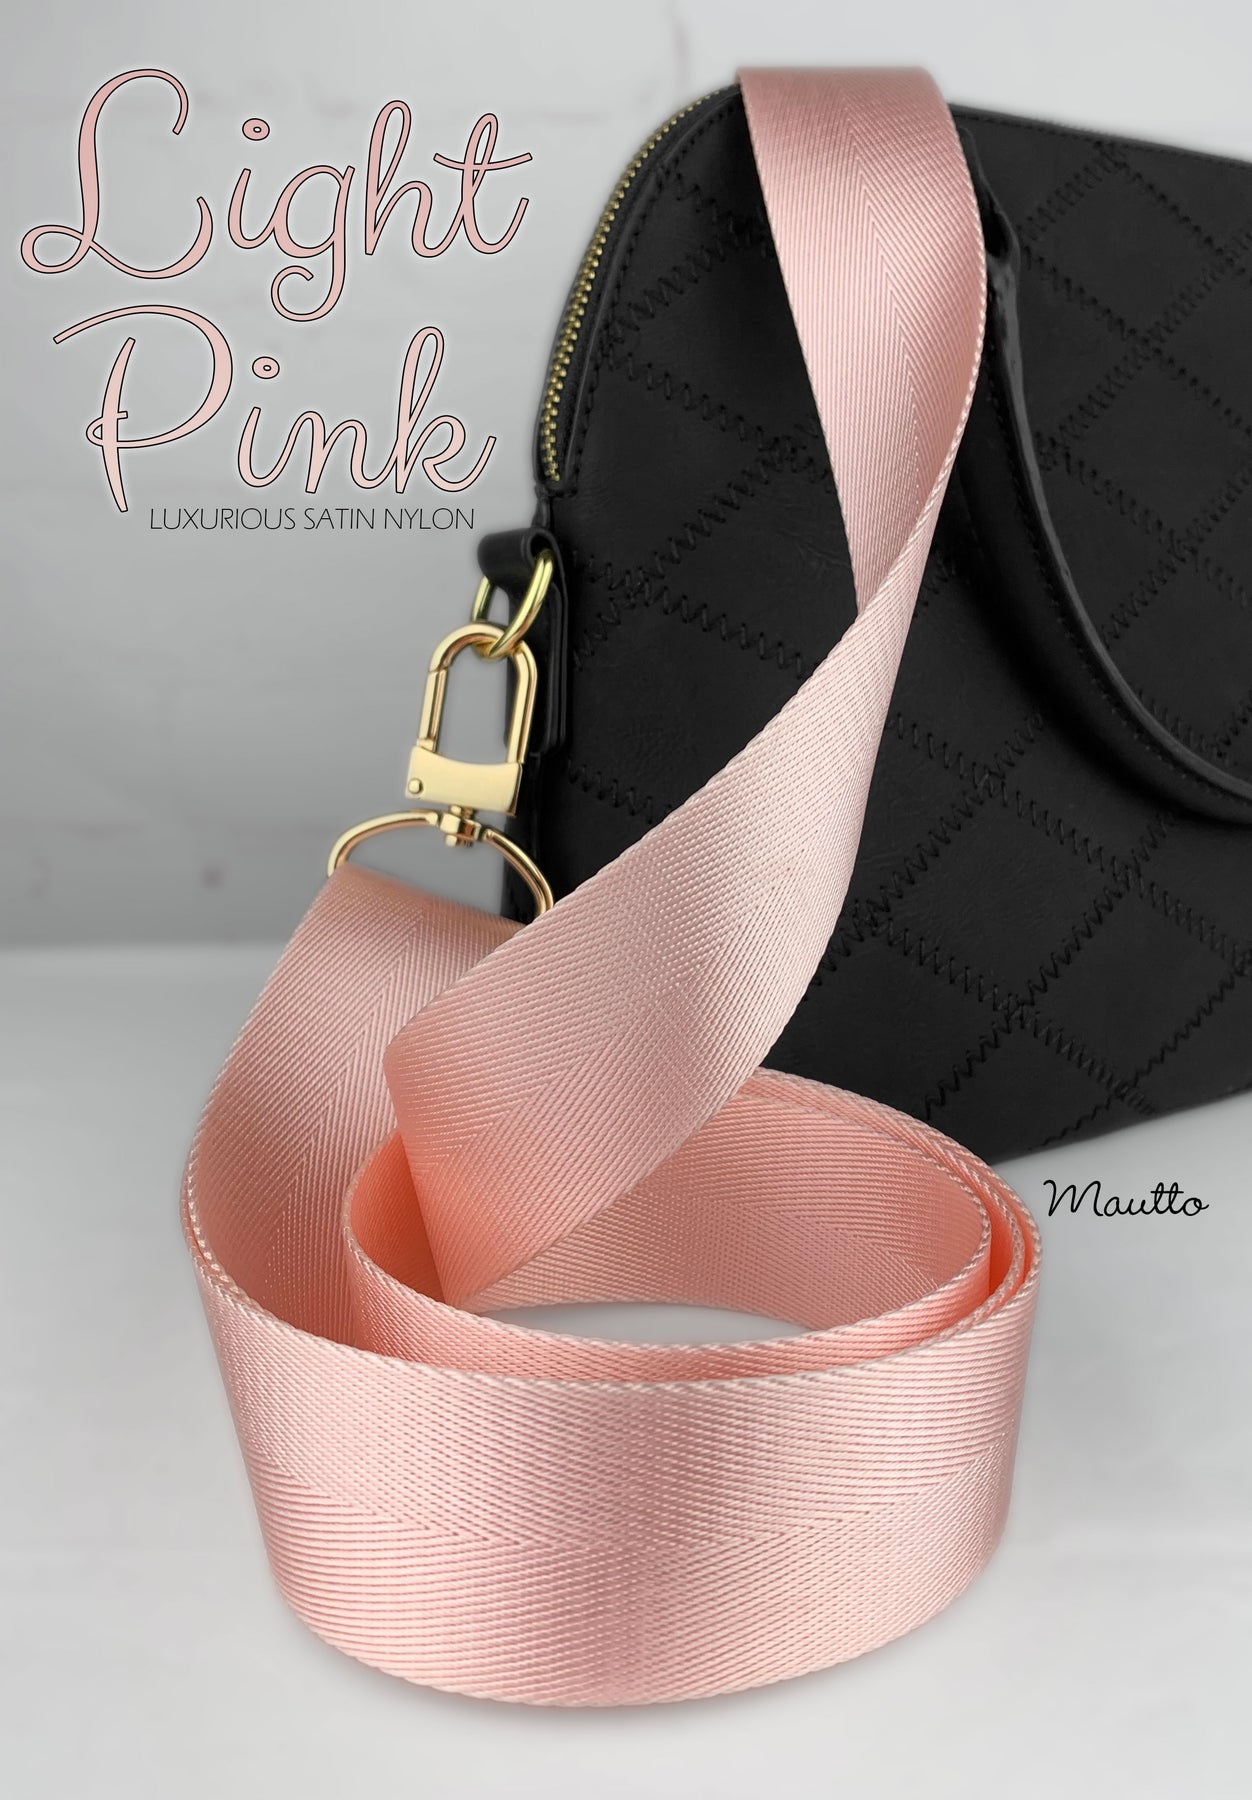 Luxurious Satin Nylon Strap - Wide/Comfy Shoulder to Crossbody Length Luxe Dusty Rose / #19 Gold-Tone